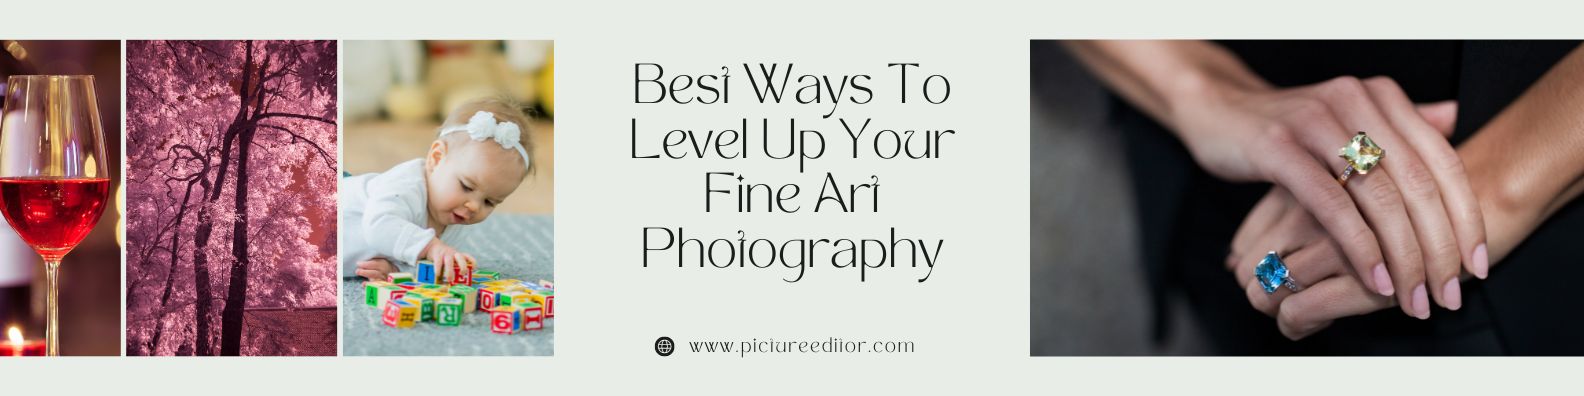 Best Ways To Level Up Your Fine Art Photography